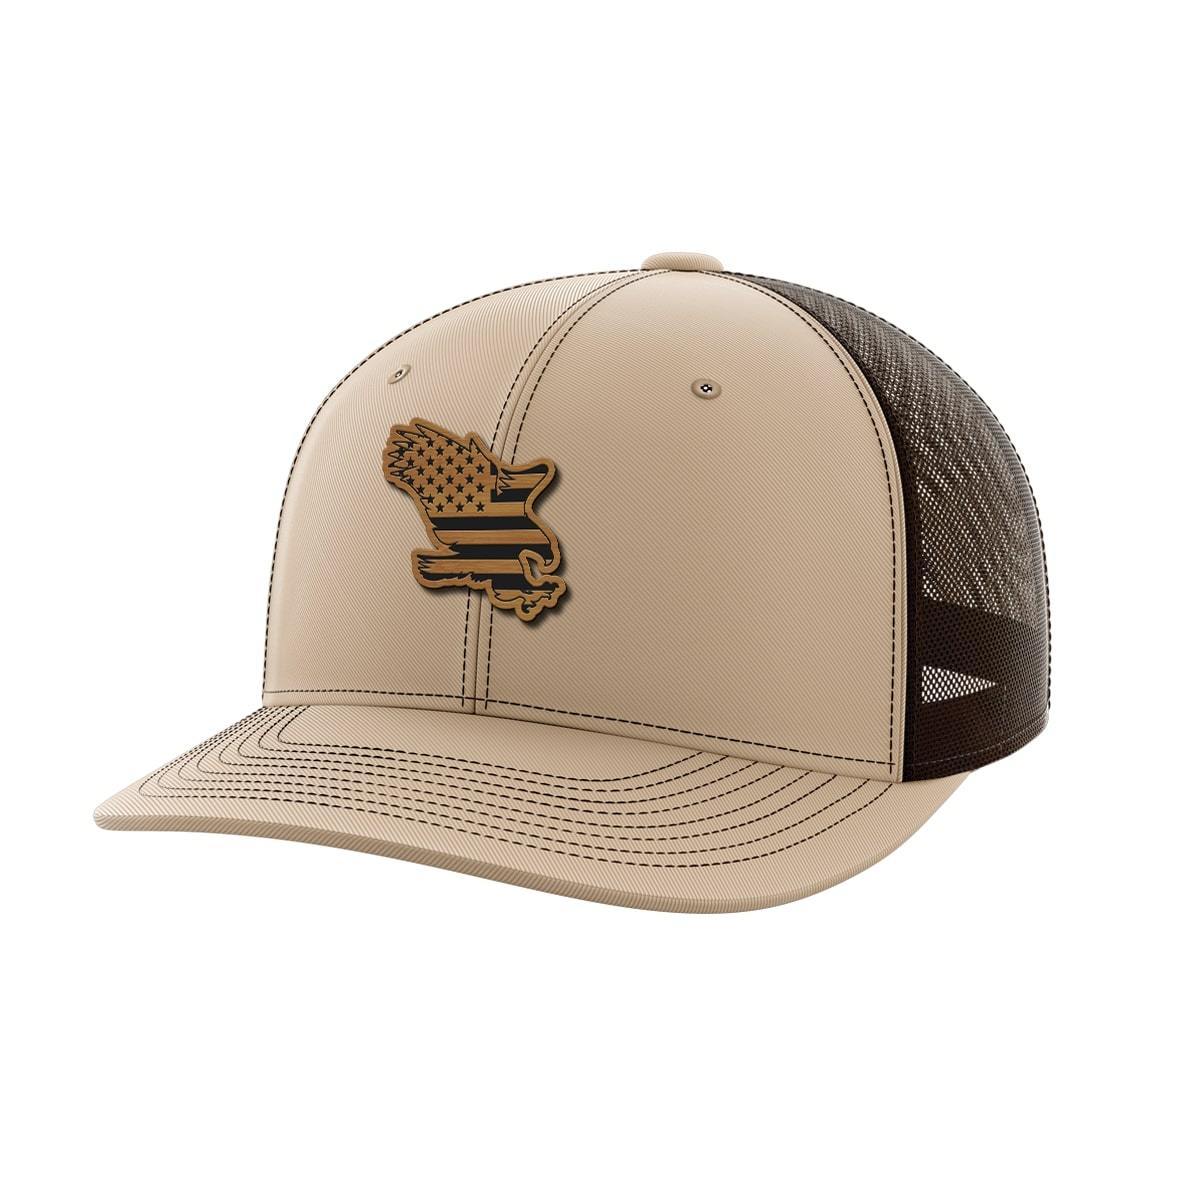 Eagle Bamboo Patch Hat - Greater Half